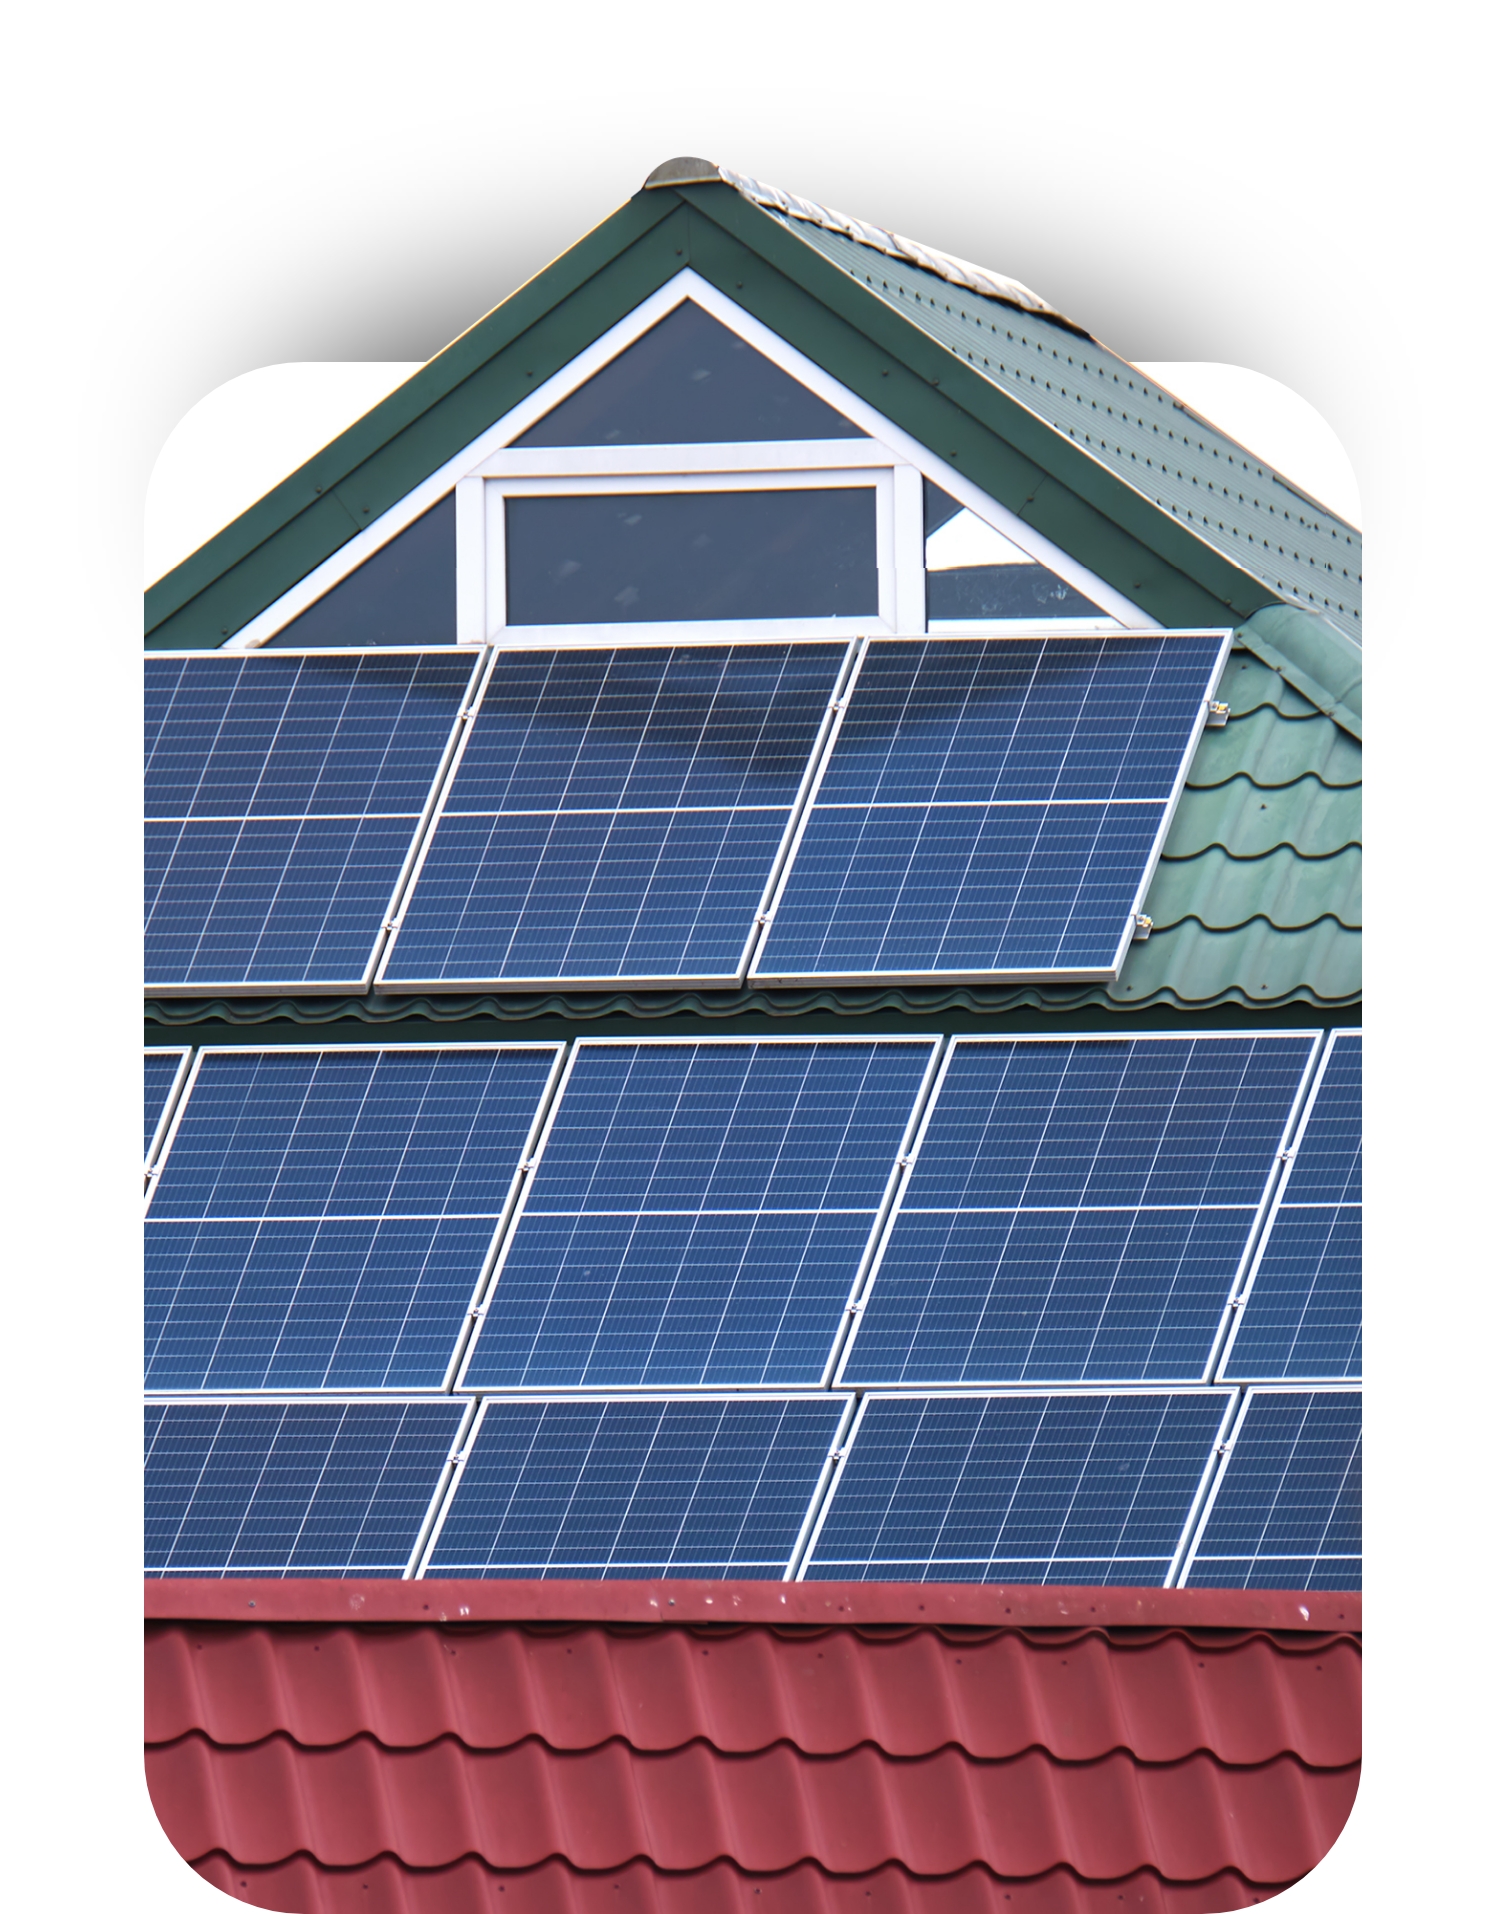 Our local solar company is your best resource if you want to install solar panels in Castle Pines, CO